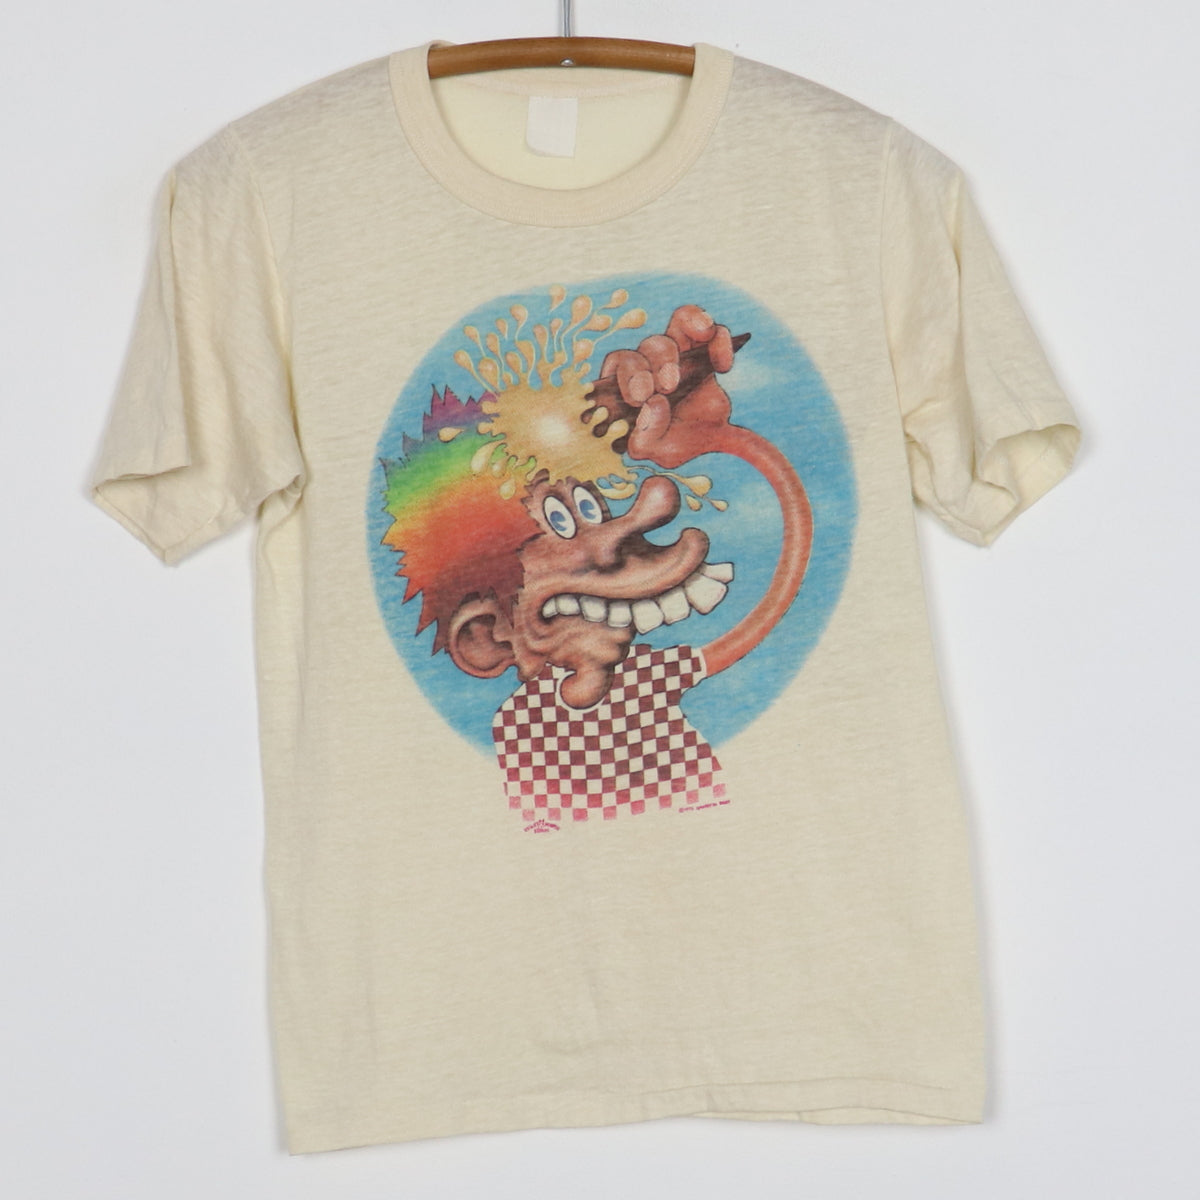 Grateful Dead Skeleton Mountain and Sun Concert T-Shirt, Collectible